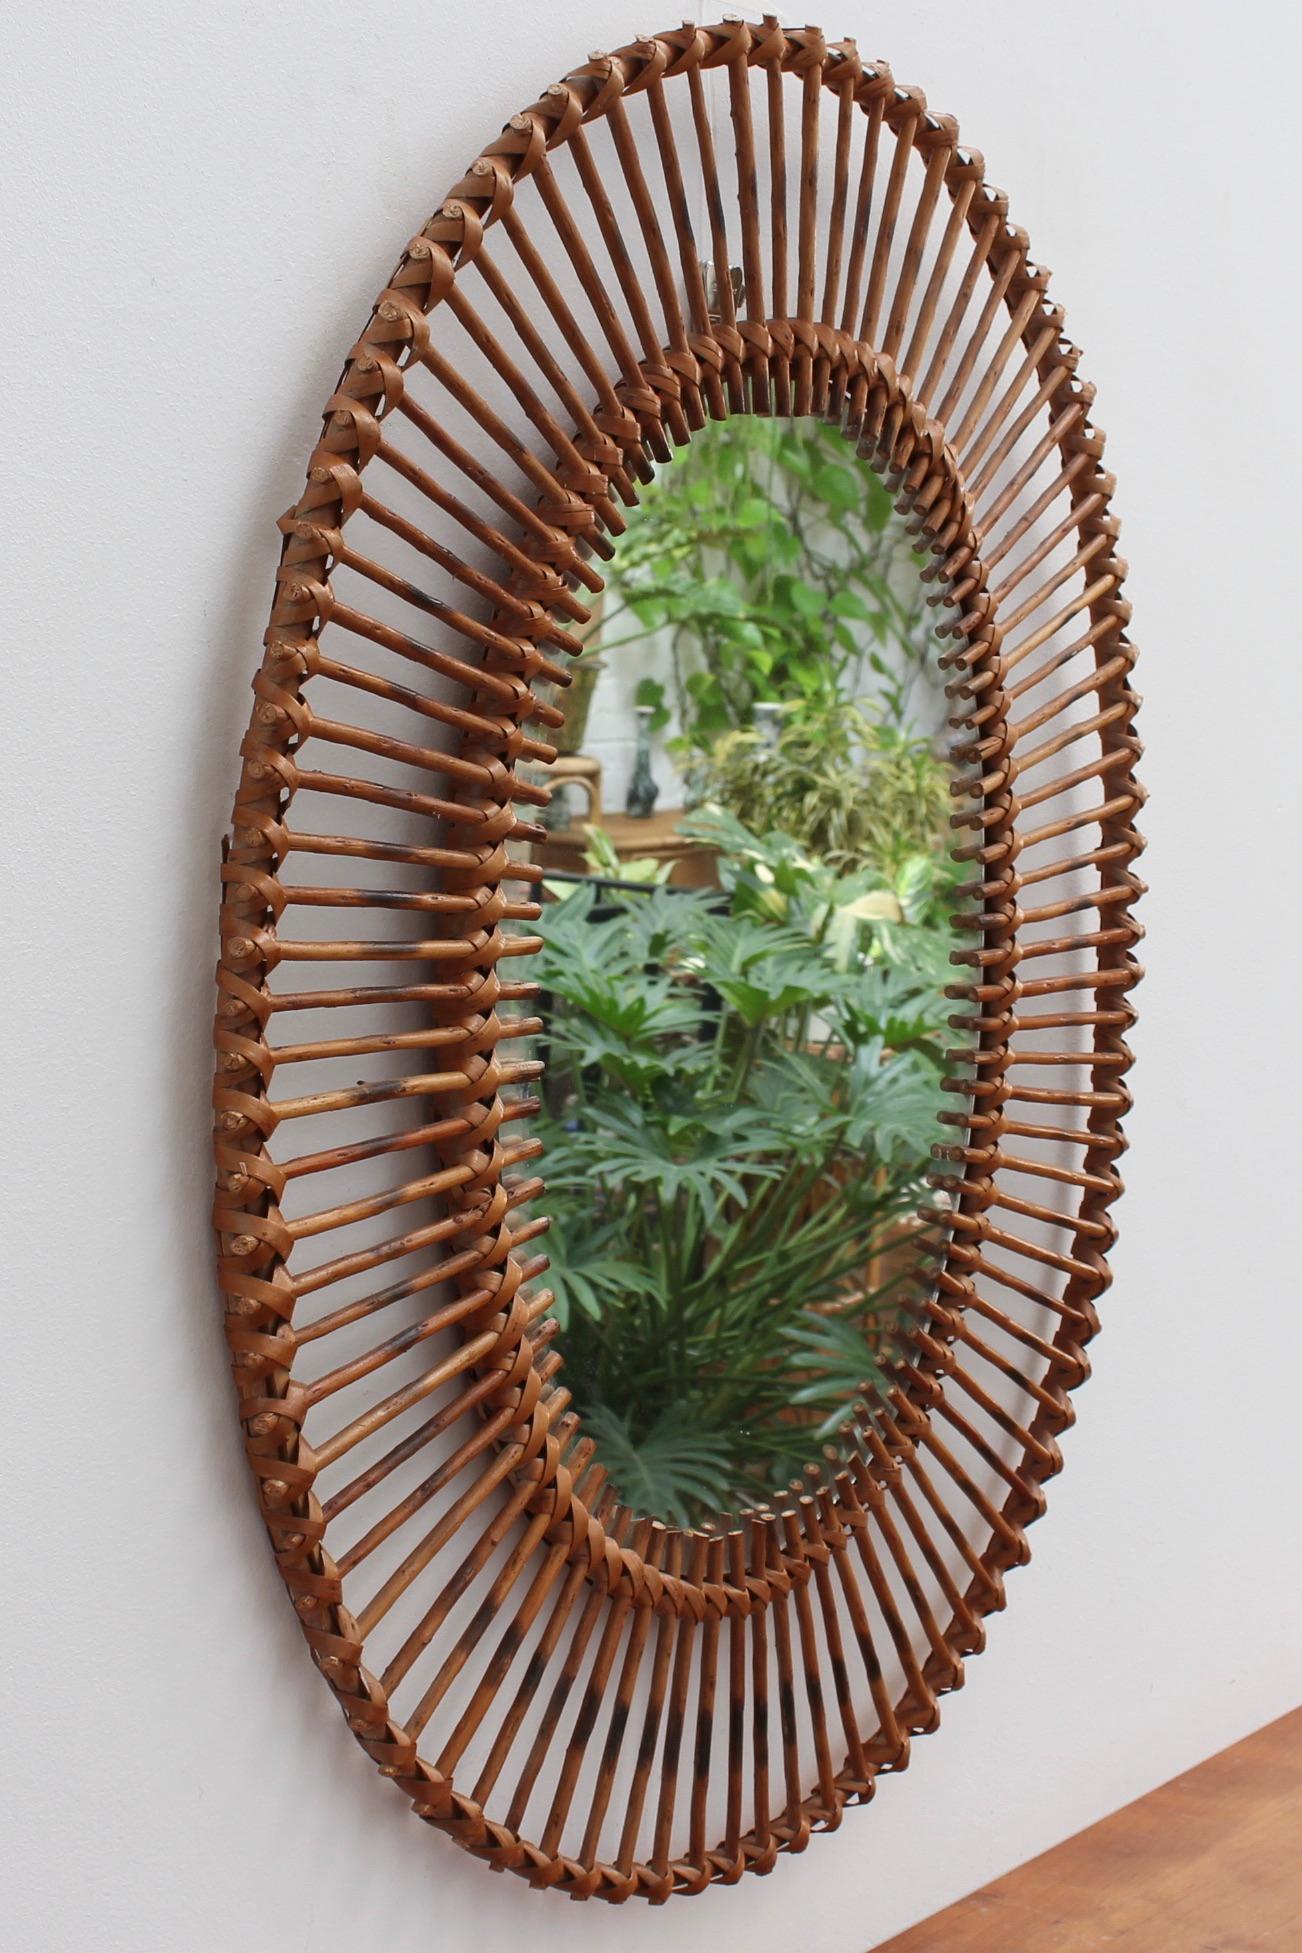 French rattan oval-shaped wall mirror (circa 1960s). A distinctive vintage mirror which transports you immediately to another place and another time, perhaps the French Riviera or Miami's South Beach, circa 1960. Its elegant glass is oval-shaped,